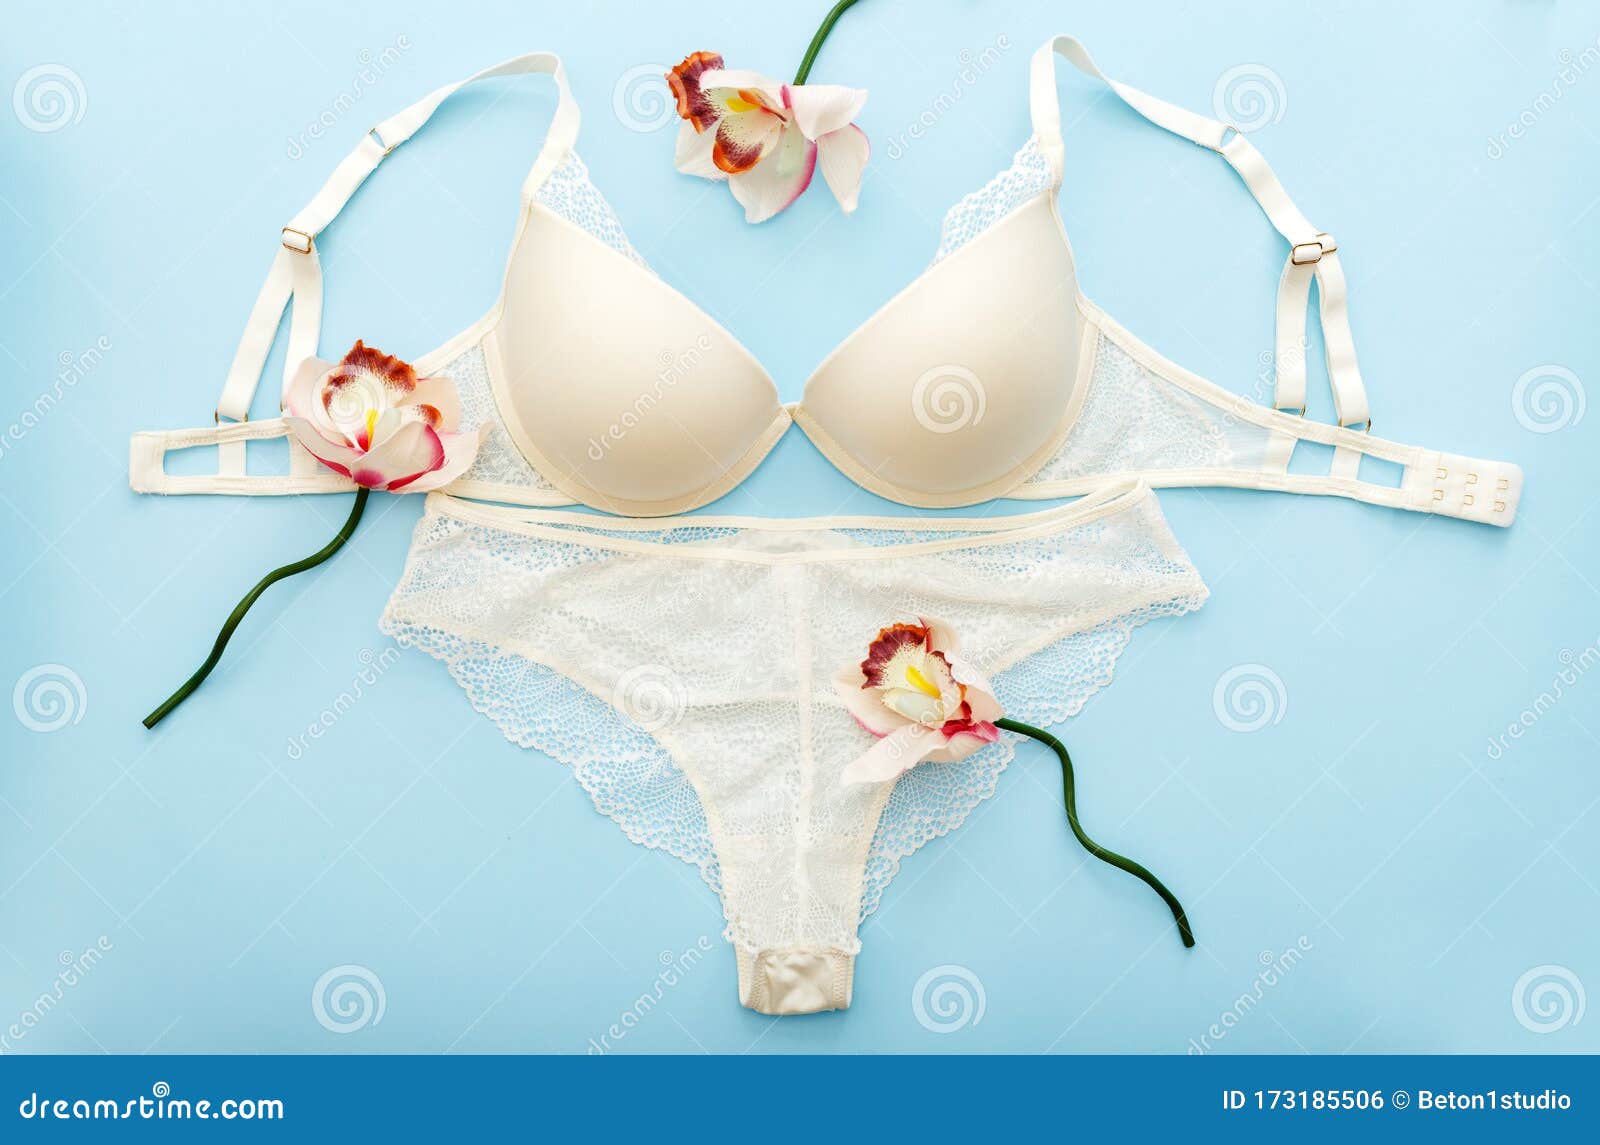 https://thumbs.dreamstime.com/z/bra-pantie-white-lace-lingerie-blue-background-flat-lay-lace-underwear-beautiful-romantic-sexy-passion-full-coverage-173185506.jpg